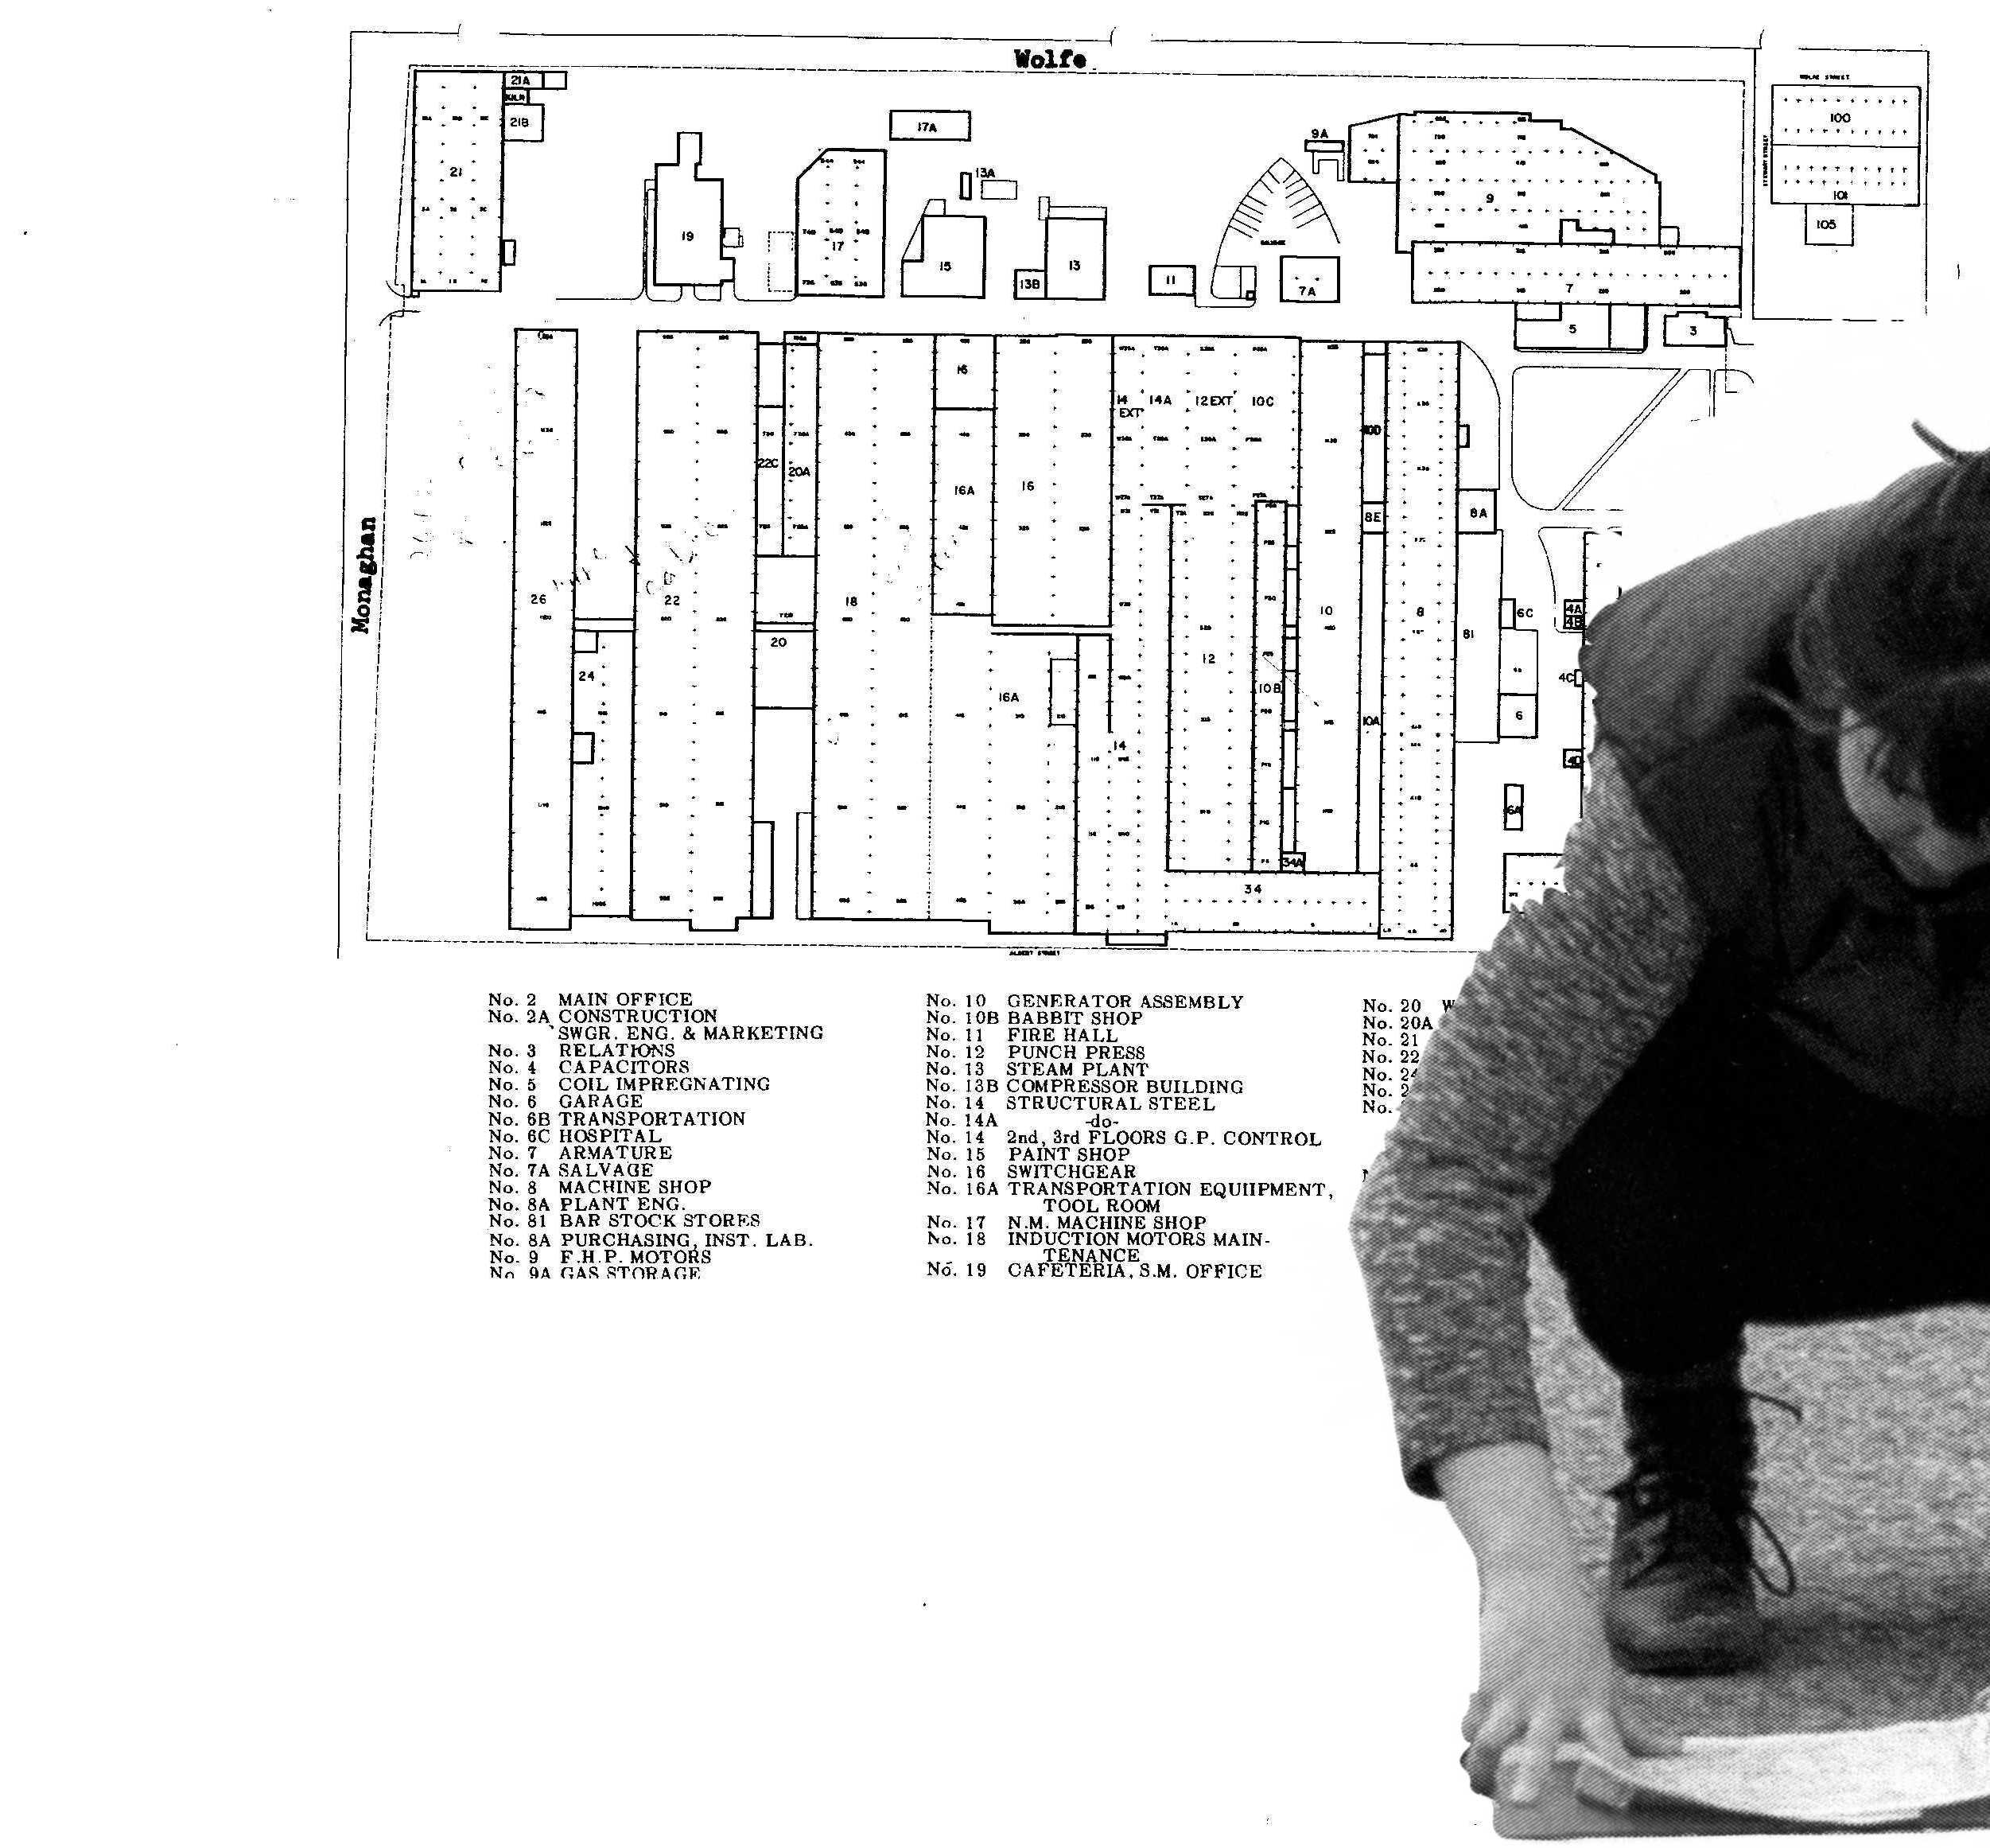 Scanned image of Anne White crouched placed in front of a floor plan.